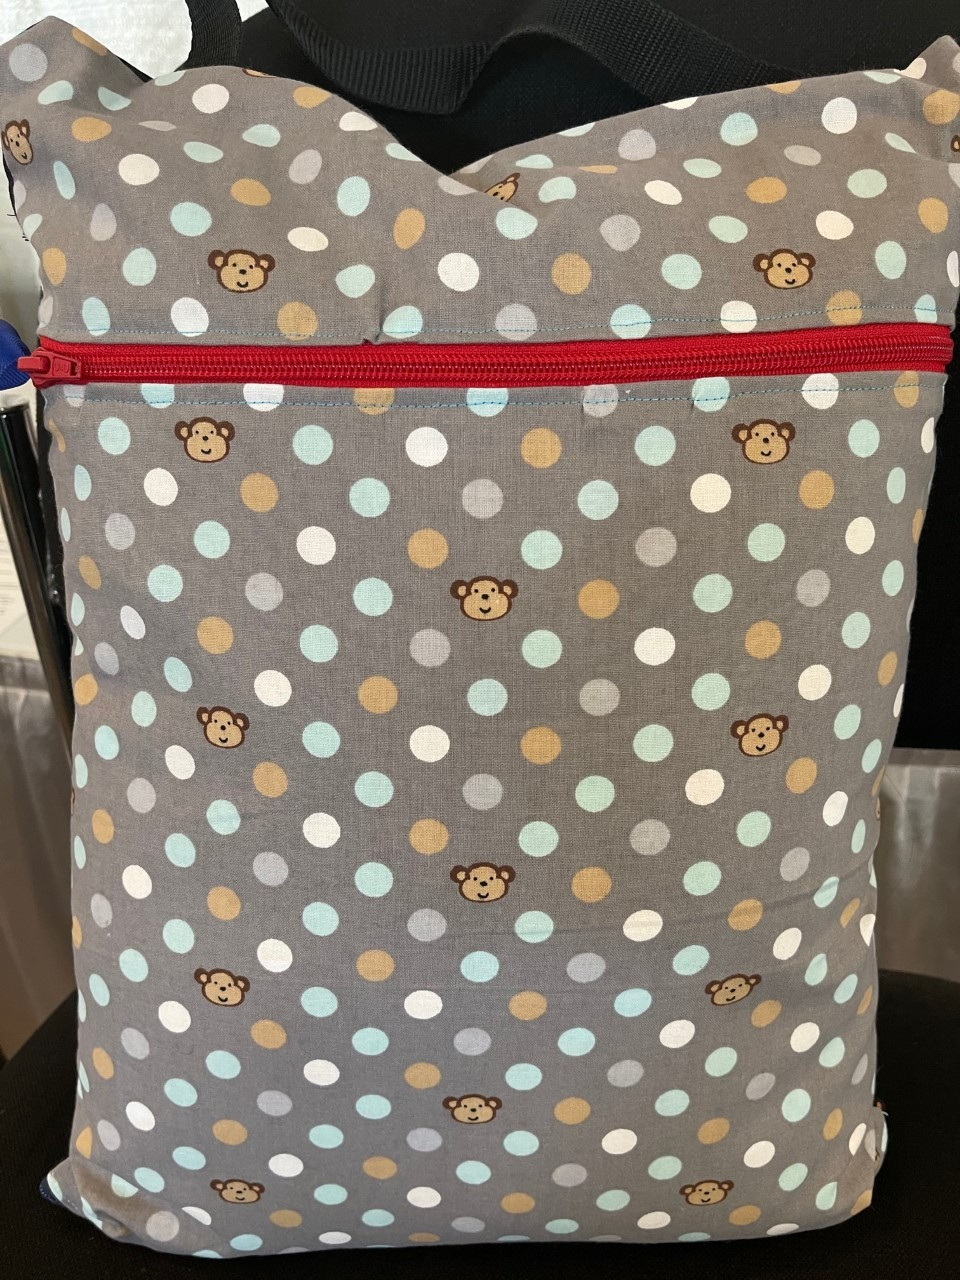 Monkey Print Pillow with zippered pouch. Approx. 14" x 10"